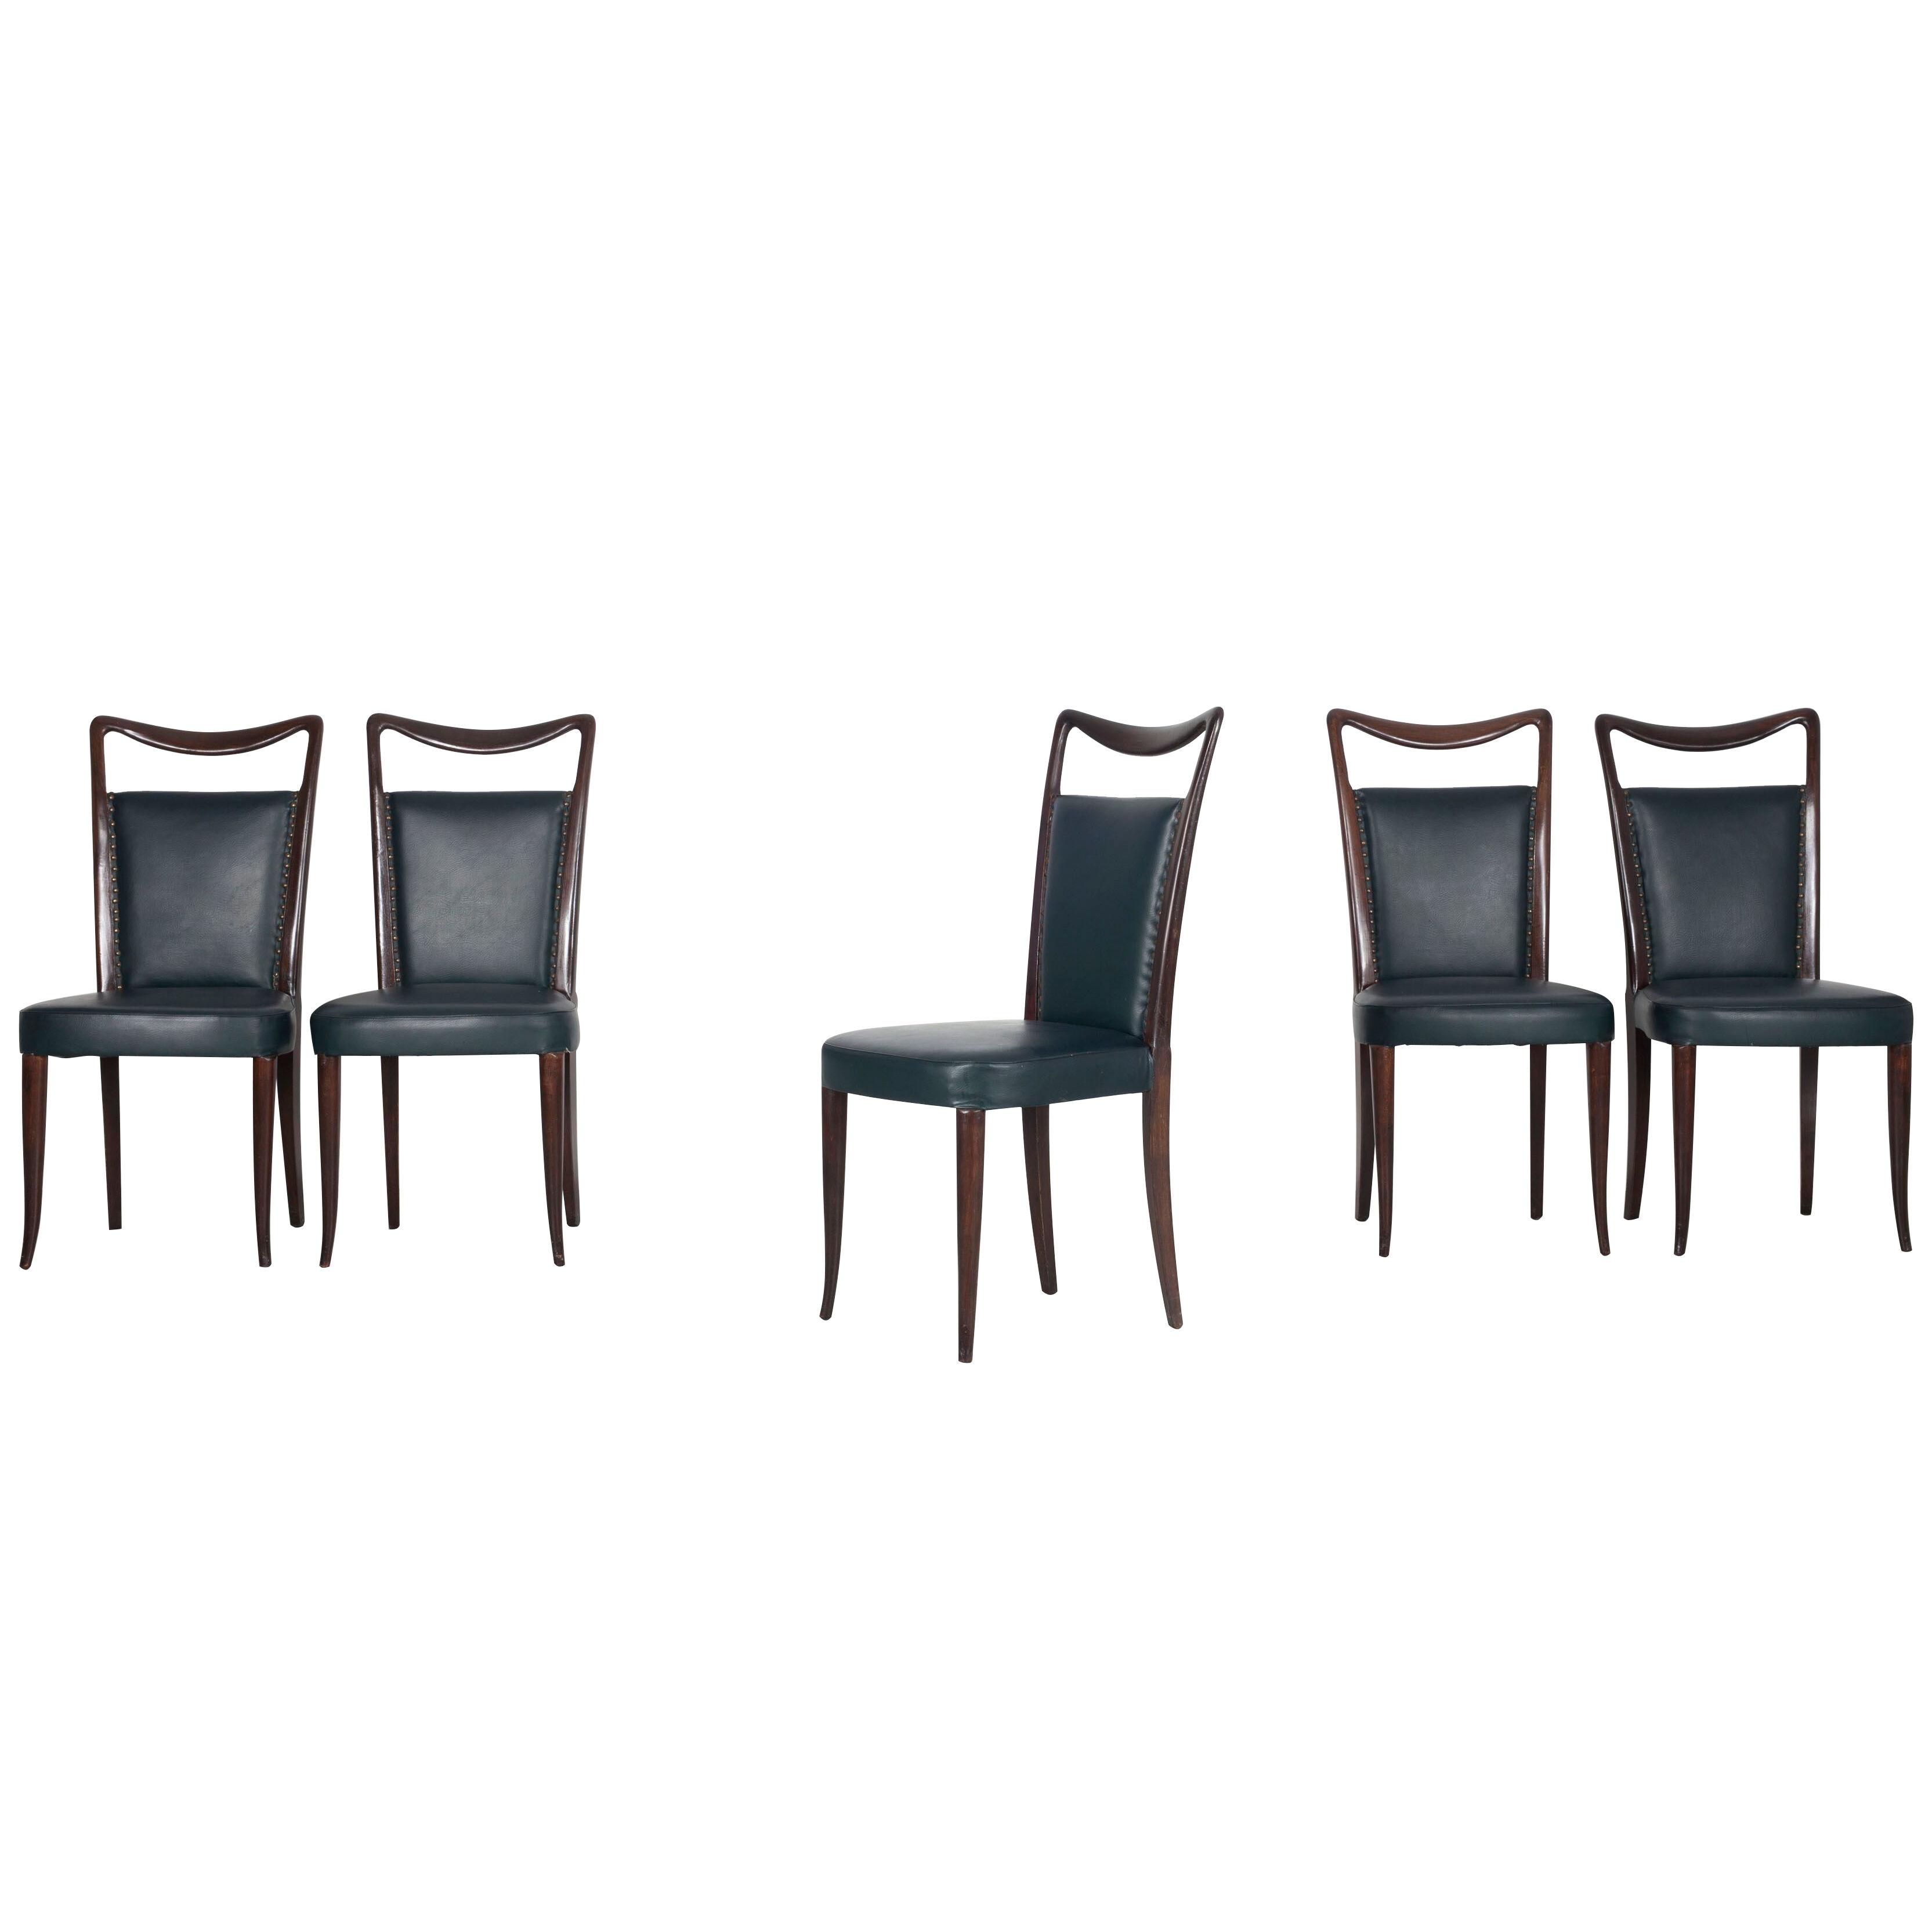  Set of six chairs from Vittorio Dassi from Italy, 1950s.